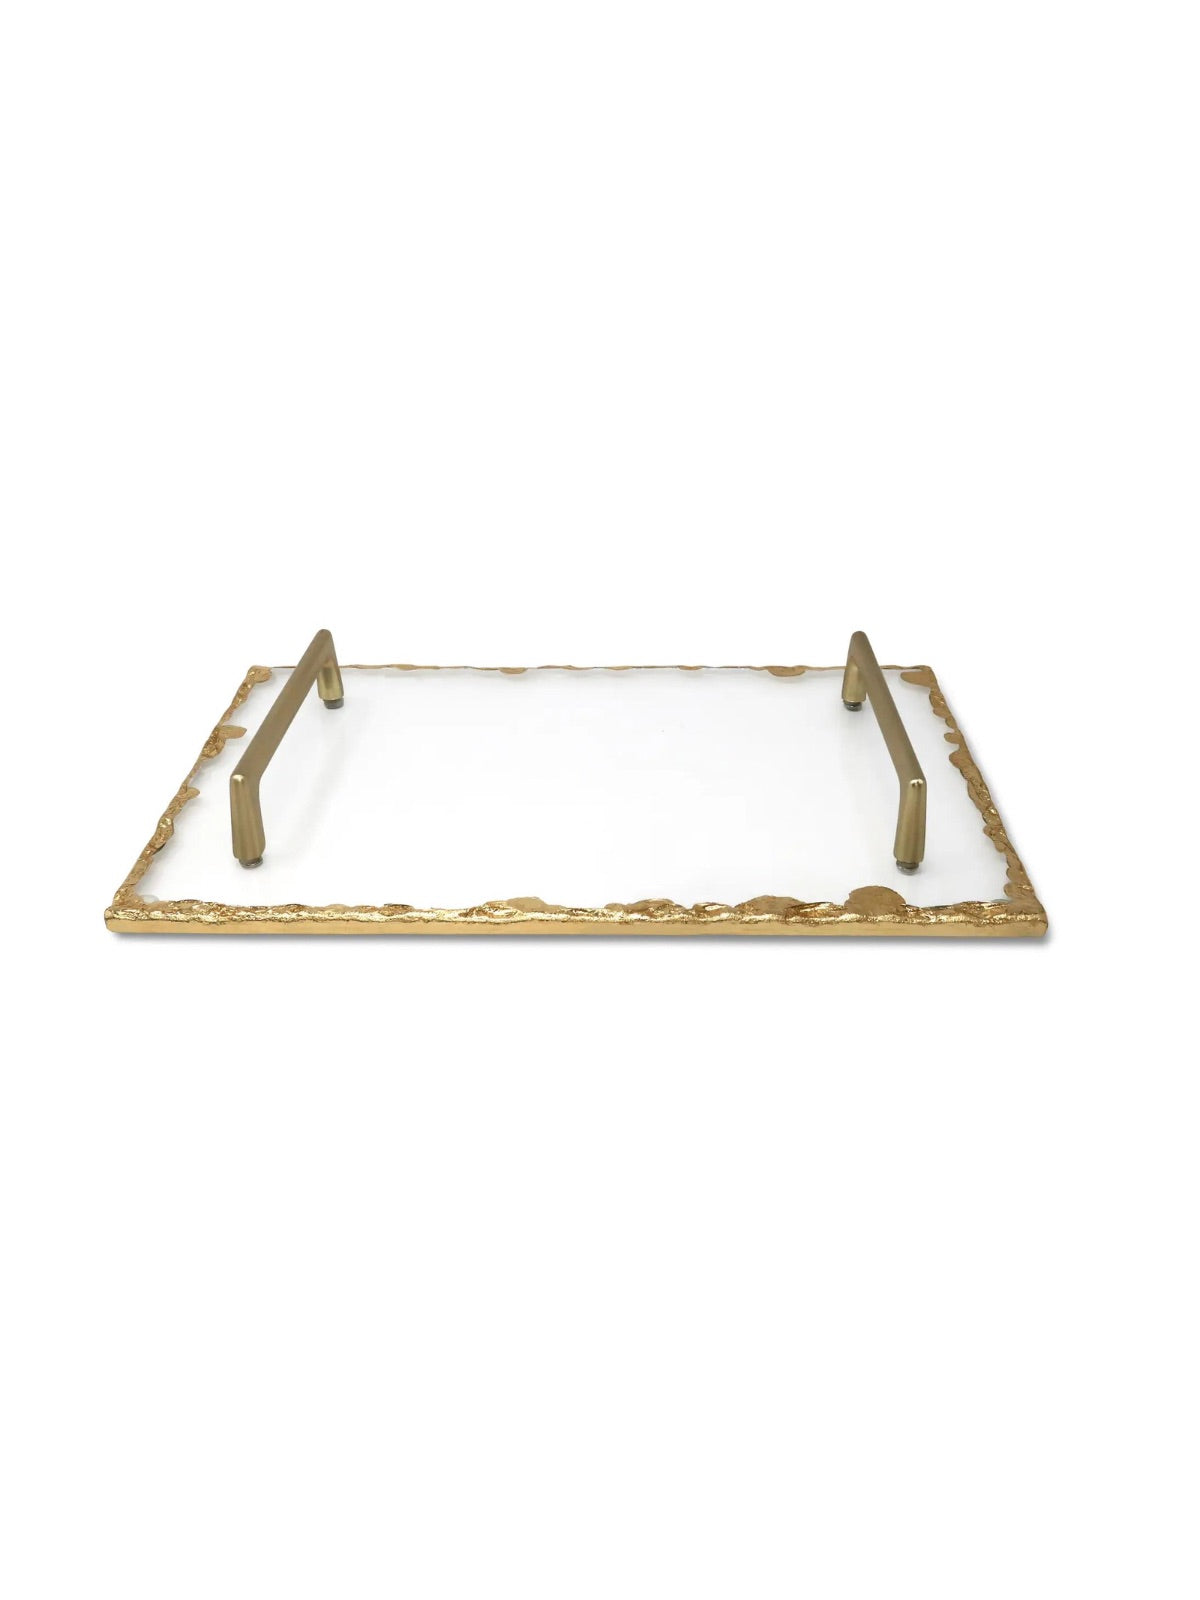 Glass Tray with Gold Rim and Handles Sold in 3 different sizes.